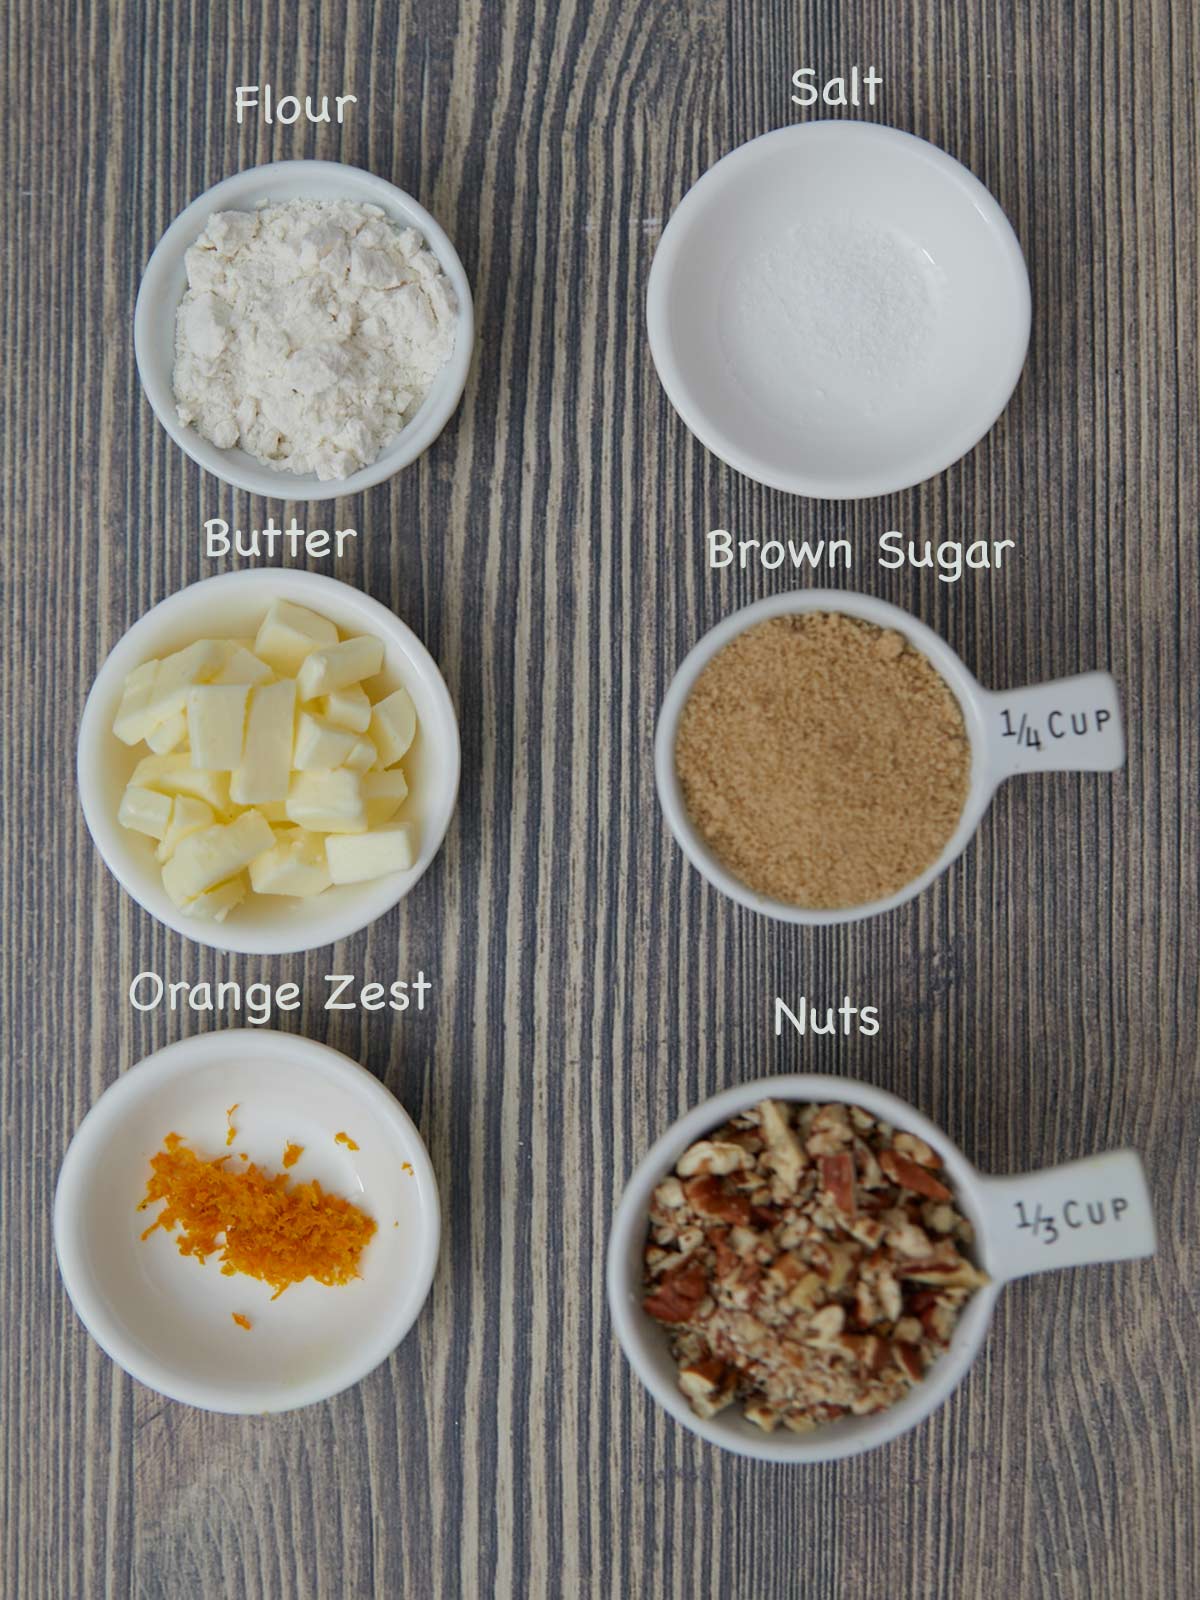 All the ingredients for the streusel topping.